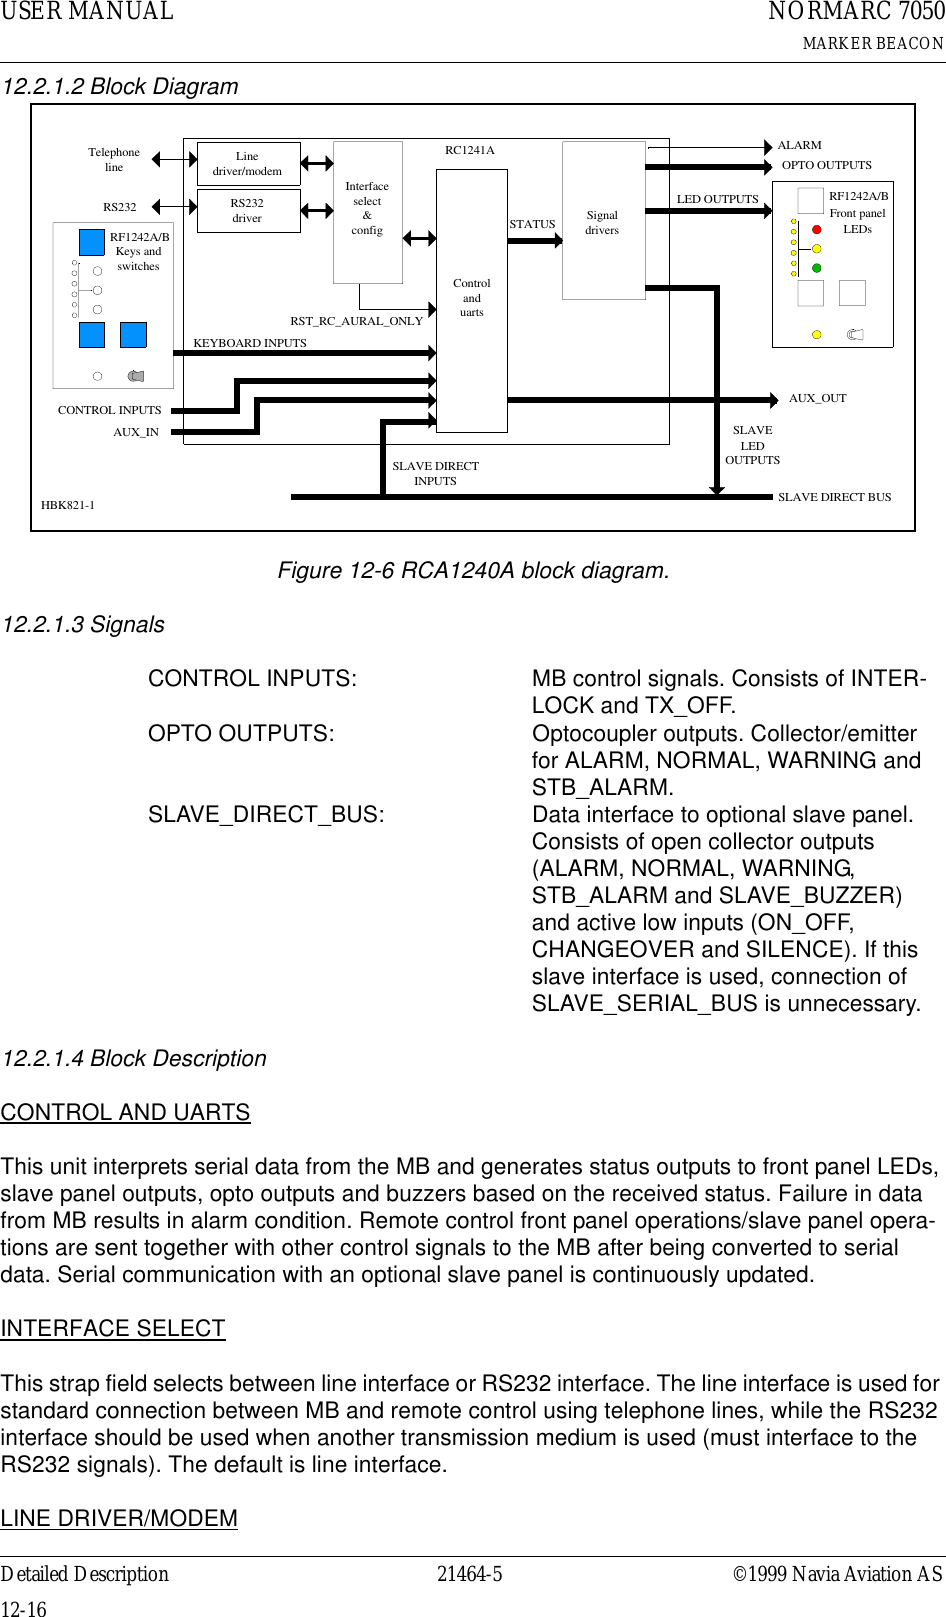 USER MANUAL12-1621464-5NORMARC 7050MARKER BEACONDetailed Description ©1999 Navia Aviation AS12.2.1.2 Block DiagramFigure 12-6 RCA1240A block diagram.12.2.1.3 SignalsCONTROL INPUTS: MB control signals. Consists of INTER-LOCK and TX_OFF.OPTO OUTPUTS: Optocoupler outputs. Collector/emitter for ALARM, NORMAL, WARNING and STB_ALARM.SLAVE_DIRECT_BUS: Data interface to optional slave panel. Consists of open collector outputs (ALARM, NORMAL, WARNING, STB_ALARM and SLAVE_BUZZER) and active low inputs (ON_OFF, CHANGEOVER and SILENCE). If this slave interface is used, connection of SLAVE_SERIAL_BUS is unnecessary.12.2.1.4 Block DescriptionCONTROL AND UARTSThis unit interprets serial data from the MB and generates status outputs to front panel LEDs, slave panel outputs, opto outputs and buzzers based on the received status. Failure in data from MB results in alarm condition. Remote control front panel operations/slave panel opera-tions are sent together with other control signals to the MB after being converted to serial data. Serial communication with an optional slave panel is continuously updated. INTERFACE SELECTThis strap field selects between line interface or RS232 interface. The line interface is used for standard connection between MB and remote control using telephone lines, while the RS232 interface should be used when another transmission medium is used (must interface to the RS232 signals). The default is line interface.LINE DRIVER/MODEMLinedriver/modemTelephonelineControlanduartsLED OUTPUTSRC1241ARS232driverRS232 SignaldriversSLAVE DIRECT BUSRF1242A/BFront panelLEDsAUX_INAUX_OUTKEYBOARD INPUTSRF1242A/BKeys andswitchesCONTROL INPUTSSLAVE DIRECTINPUTSSLAVELEDOUTPUTSOPTO OUTPUTSInterfaceselect&amp;configRST_RC_AURAL_ONLYSTATUSALARMHBK821-1